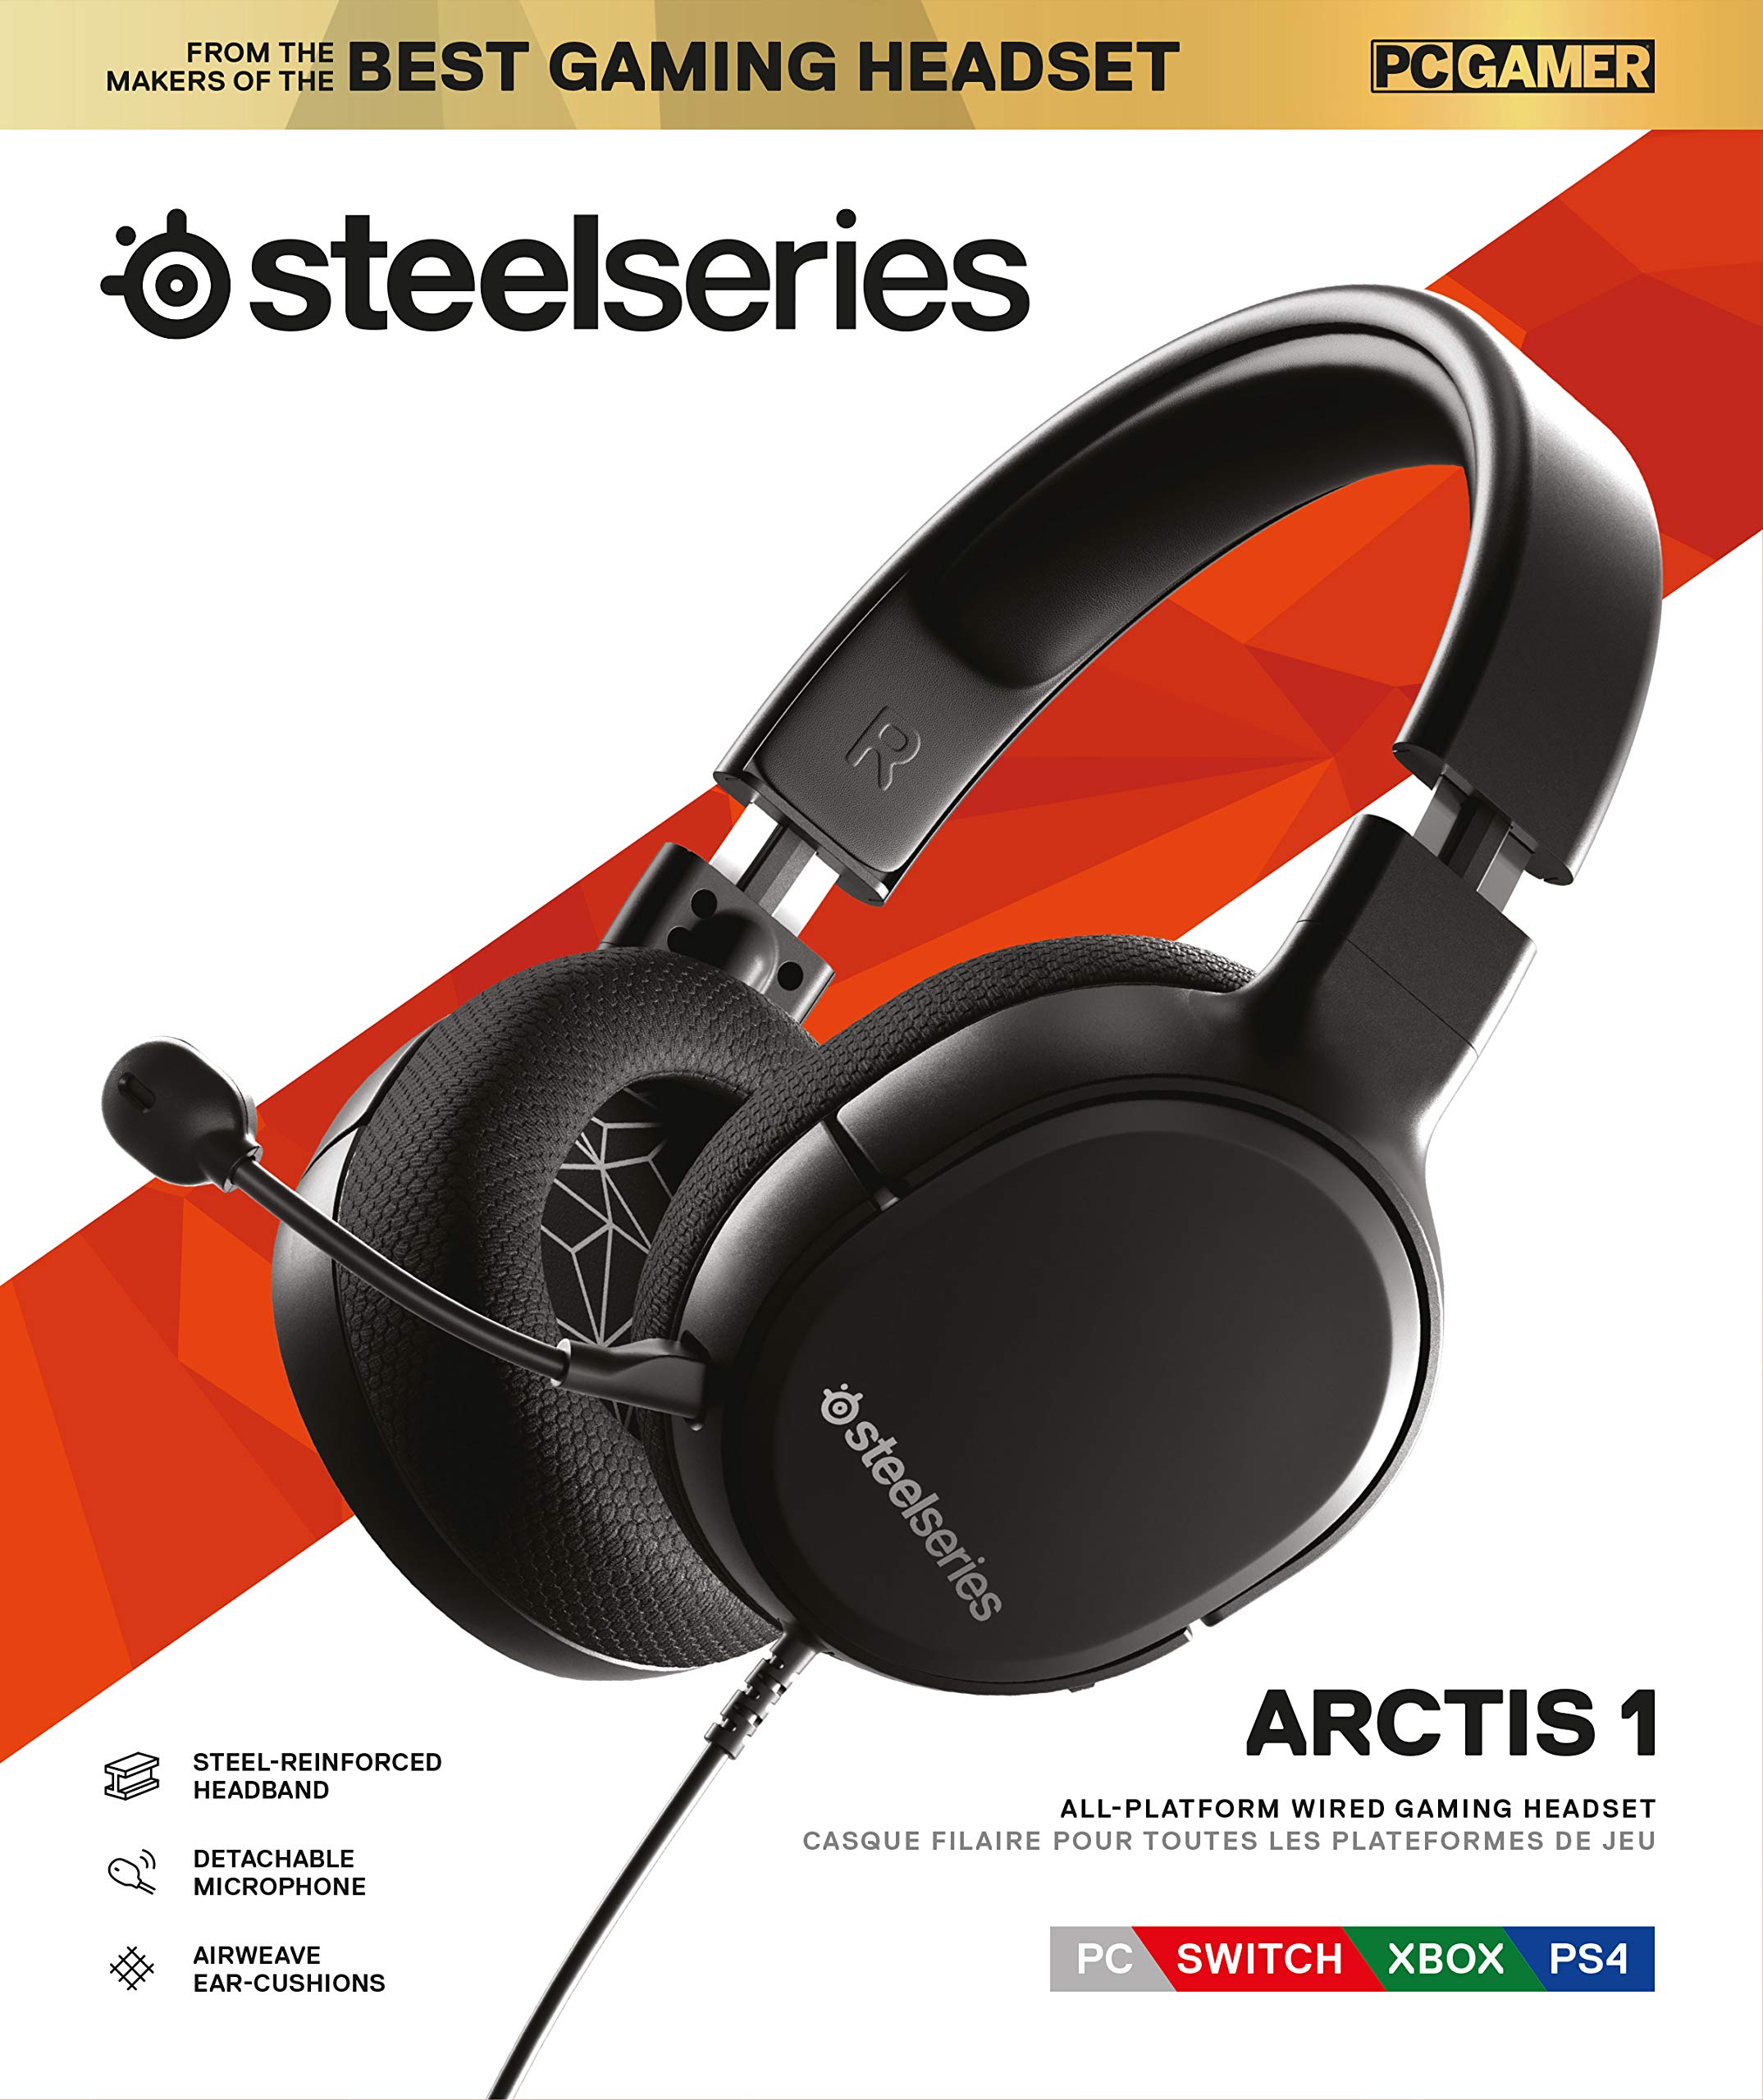 SteelSeries Arctis 1 - All-Platform Compatibility - for PC, PS4, Xbox, Nintendo Switch, Mobile - Detachable ClearCast Microphone (PS4////)